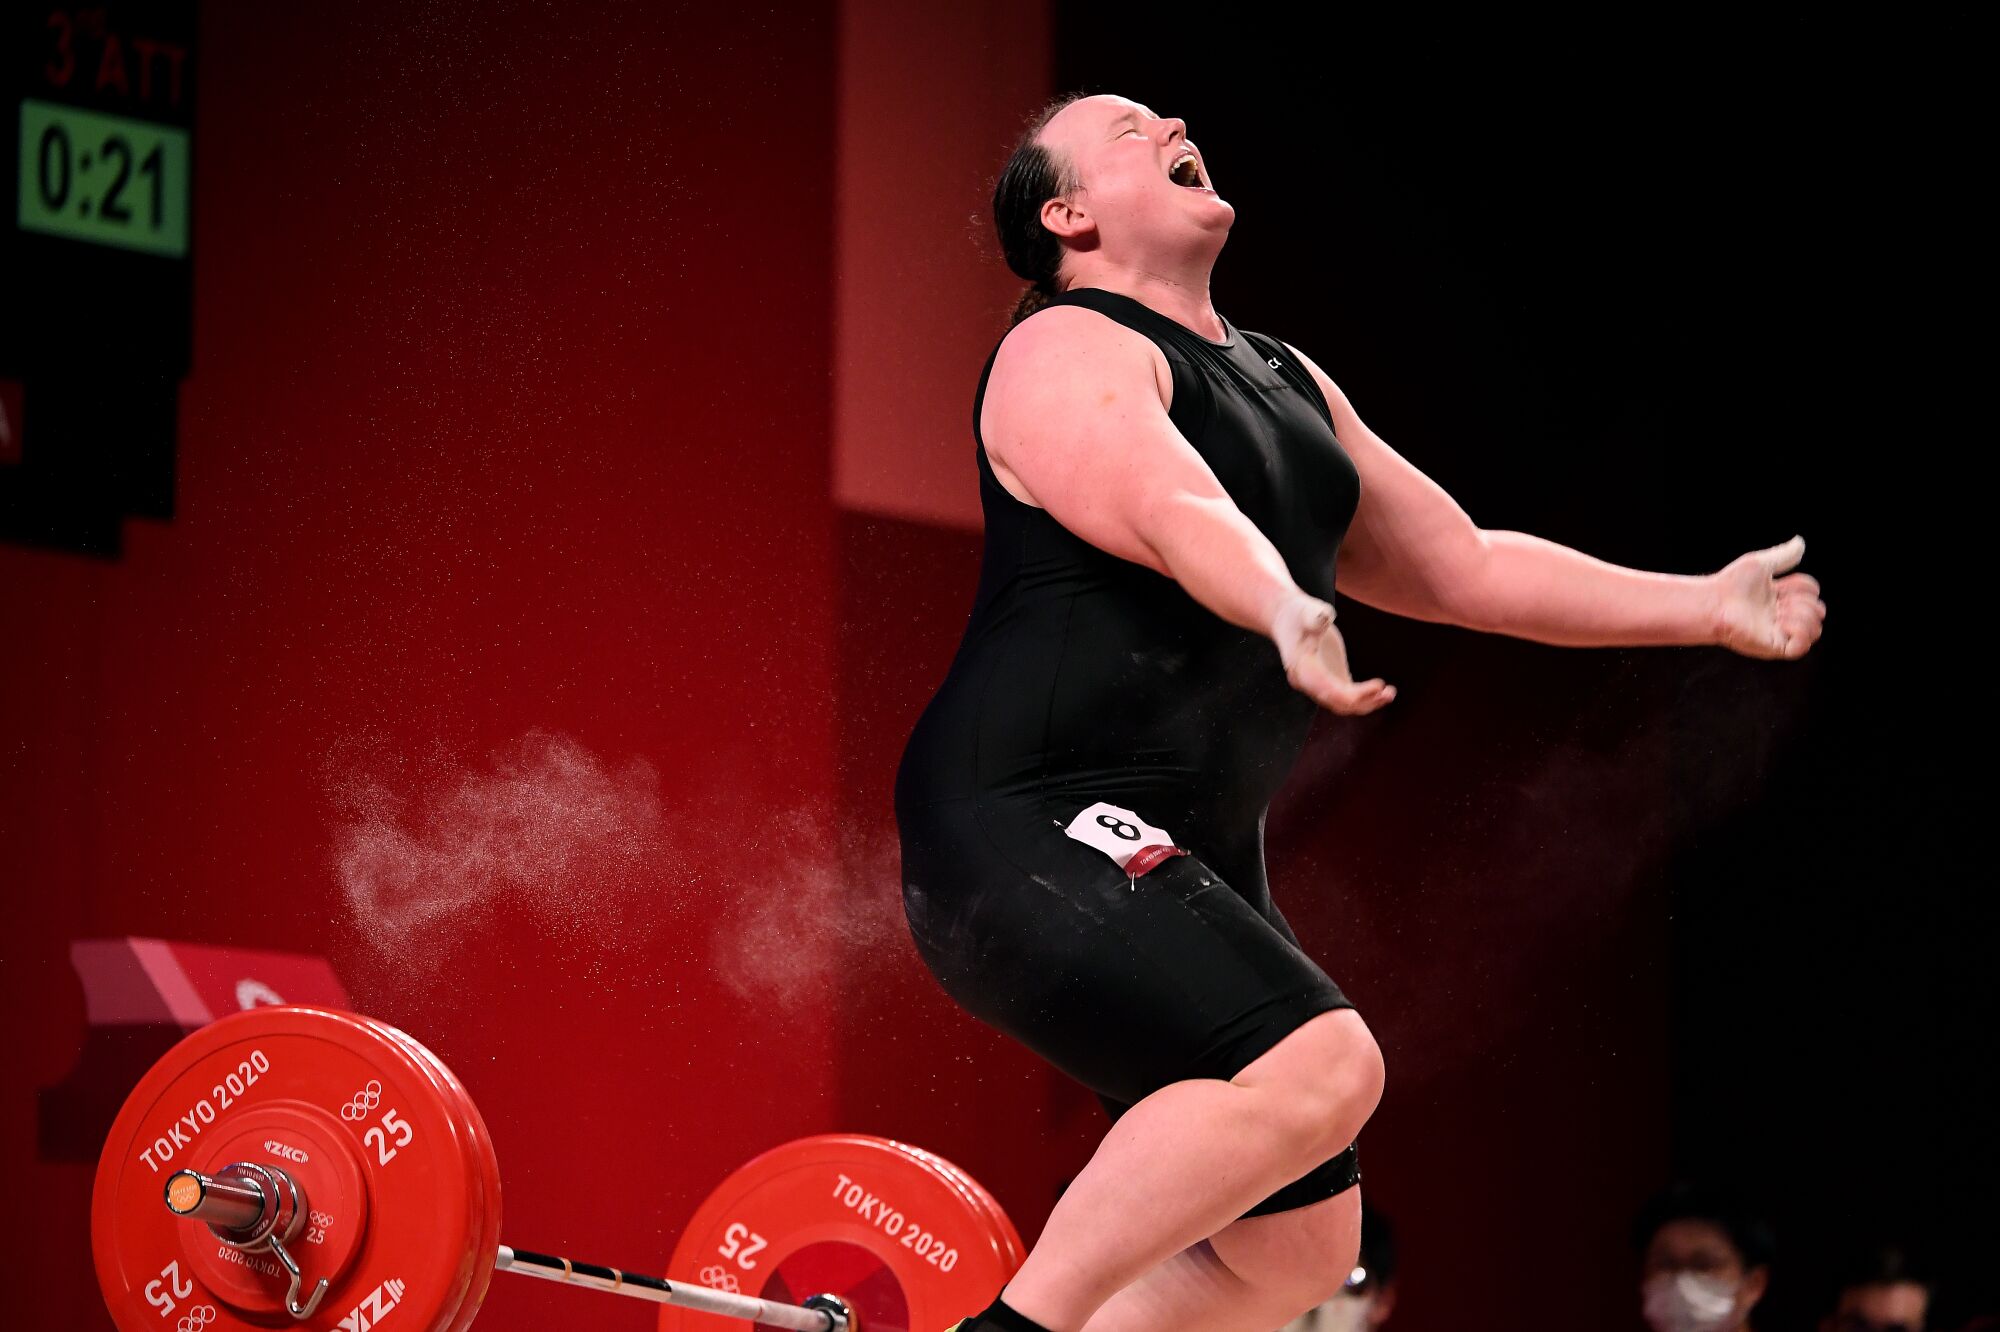 New Zealand's Laurel Hubbard can't make the lift on her final try in the women's 87kg weightlifting final.